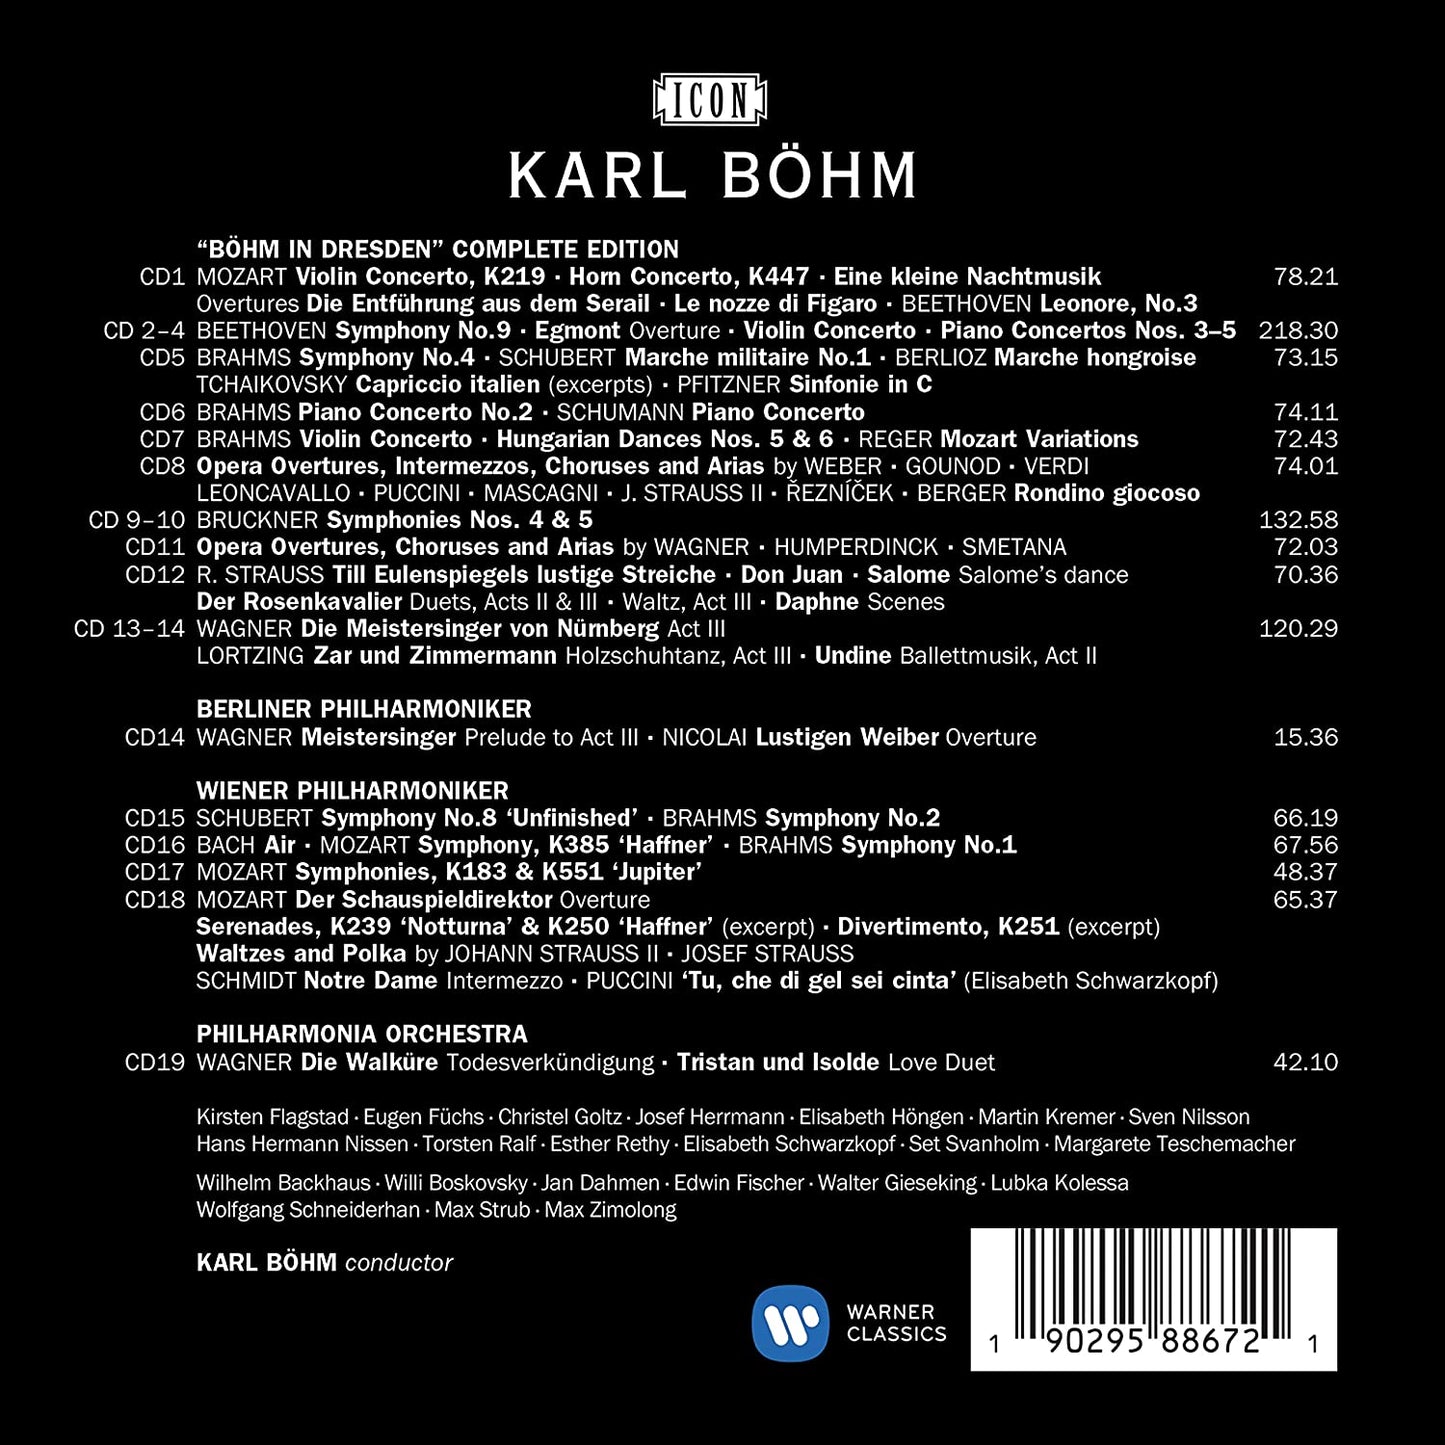 KARL BOHM: THE EARLY YEARS (19 CDS)